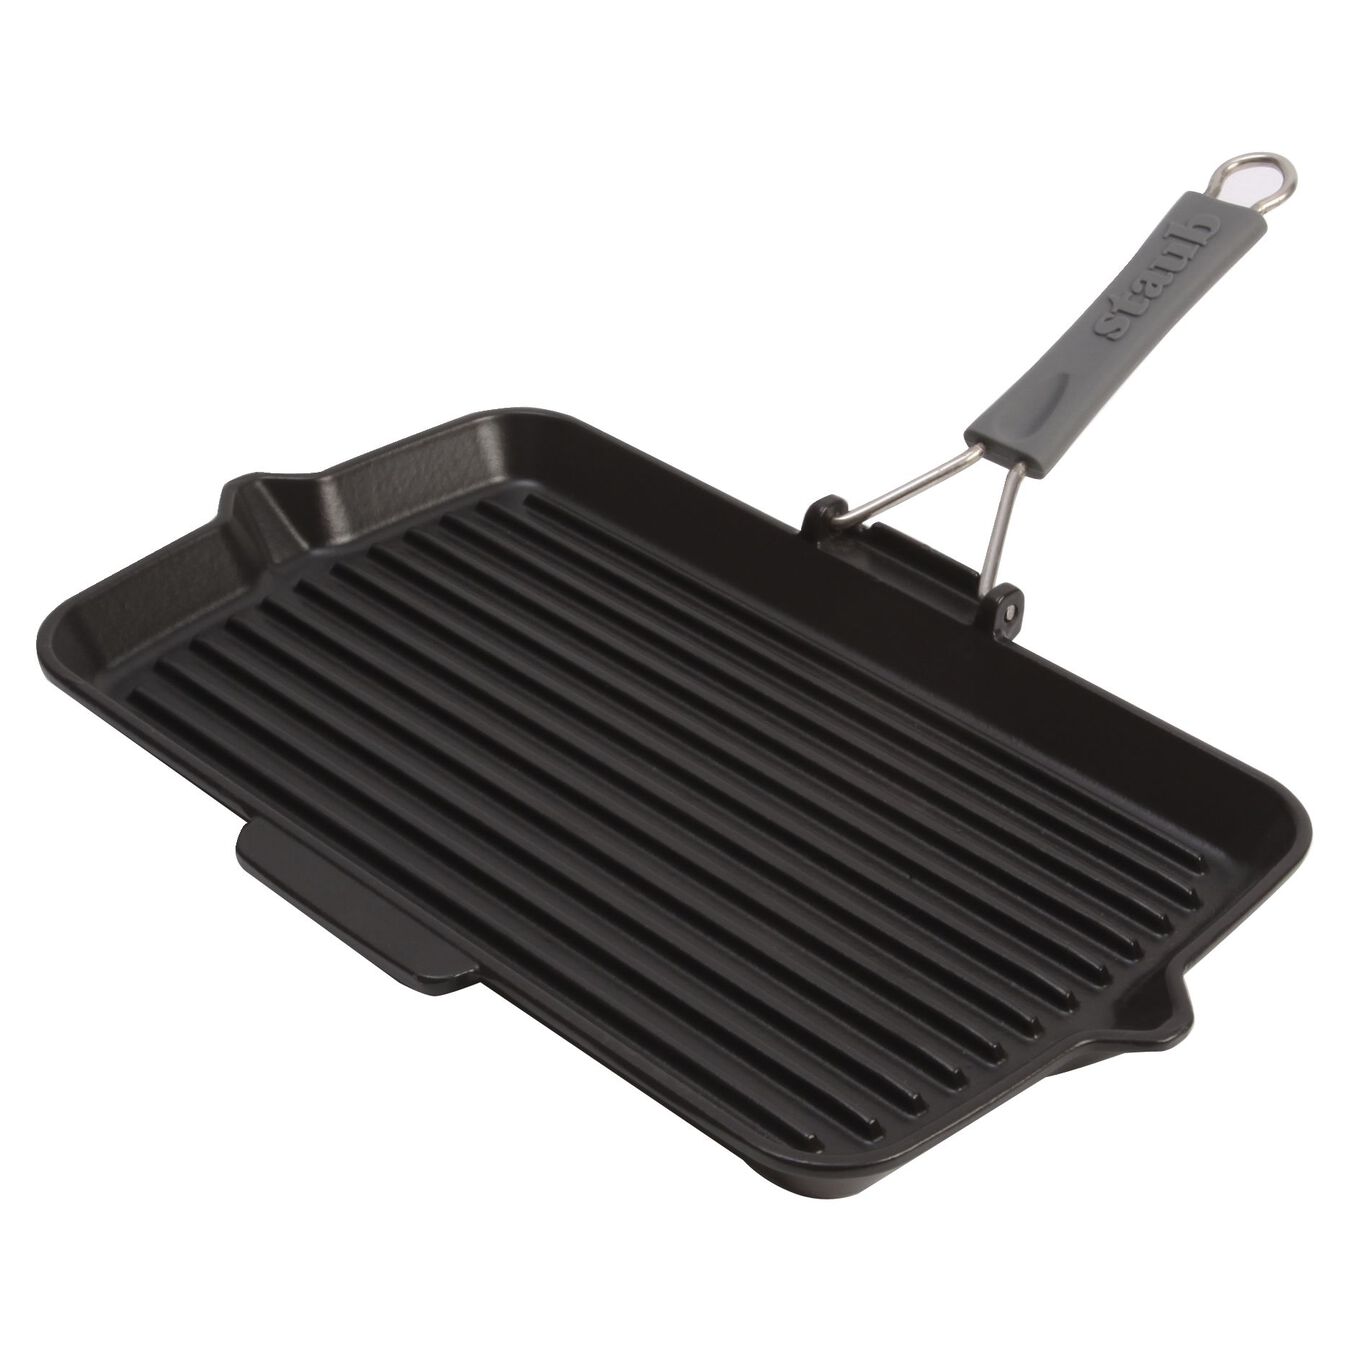 34 cm rectangular Cast iron Grill pan with pouring spout black,,large 1